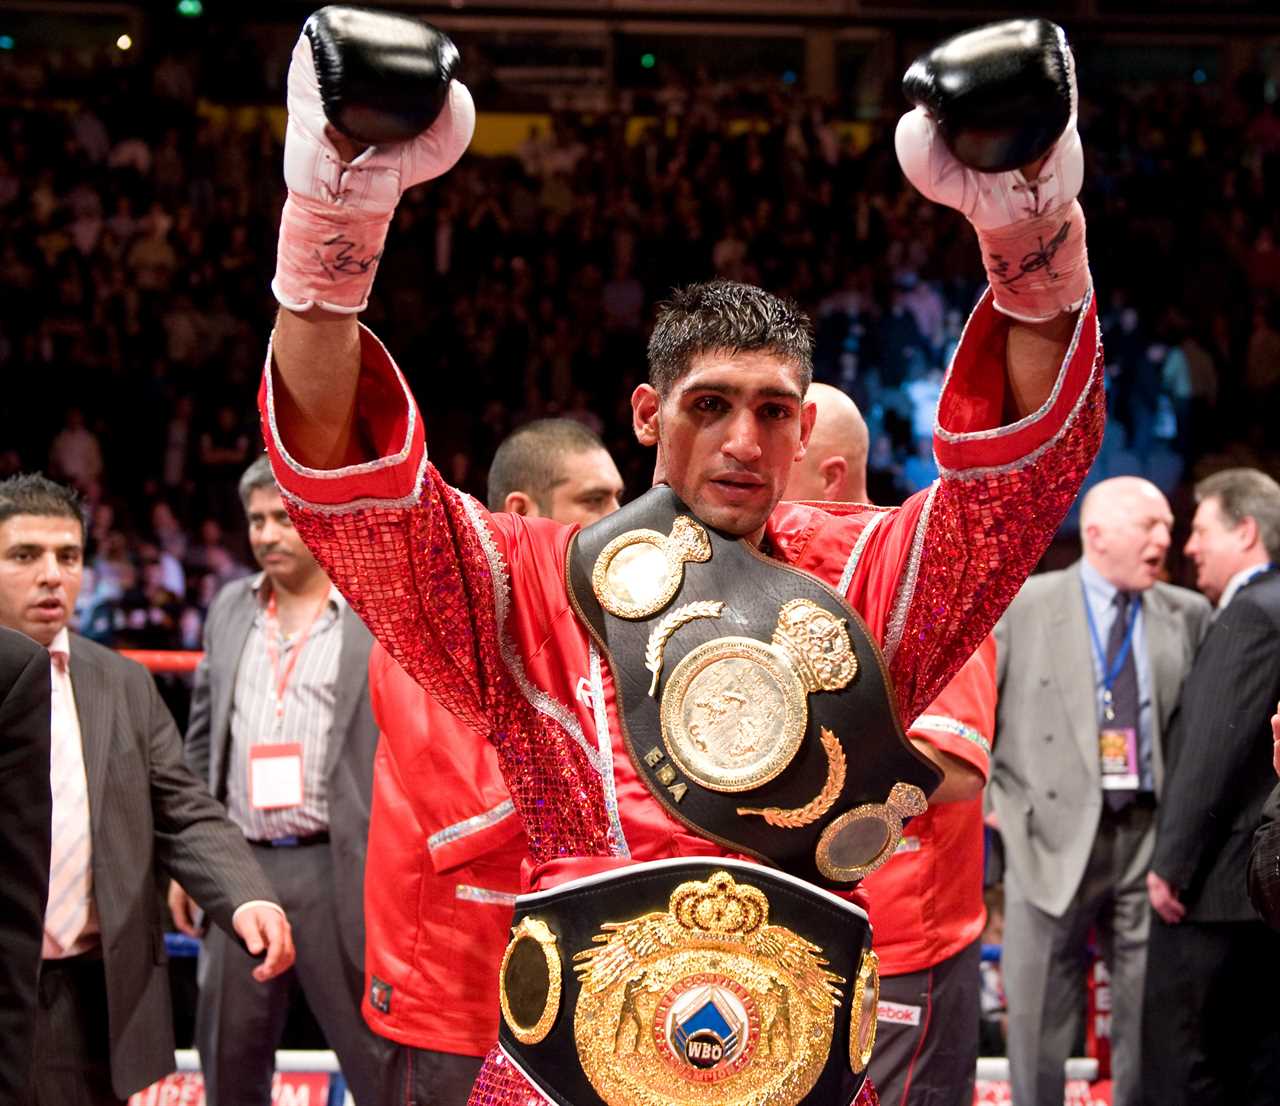 Amir Khan is now an Olympic hero, world champion, and I'm A Celebrity Star. He will be receiving a two-year ban on drugs from boxing